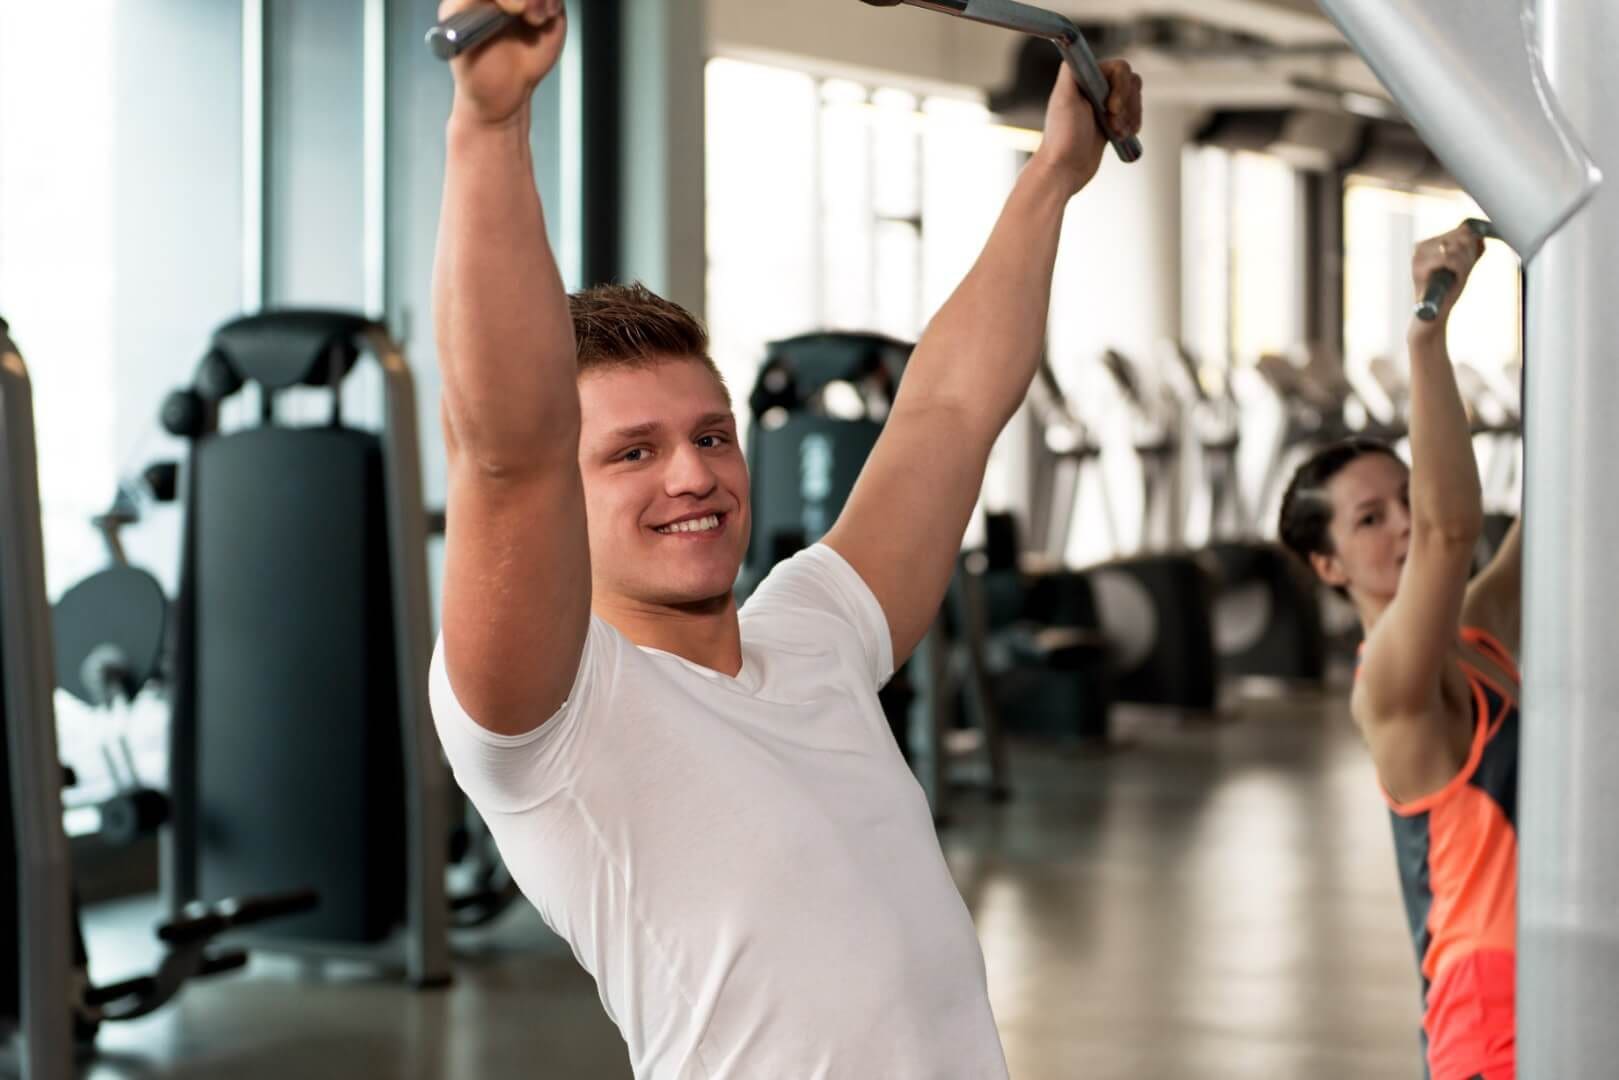 A young man works out in the gym